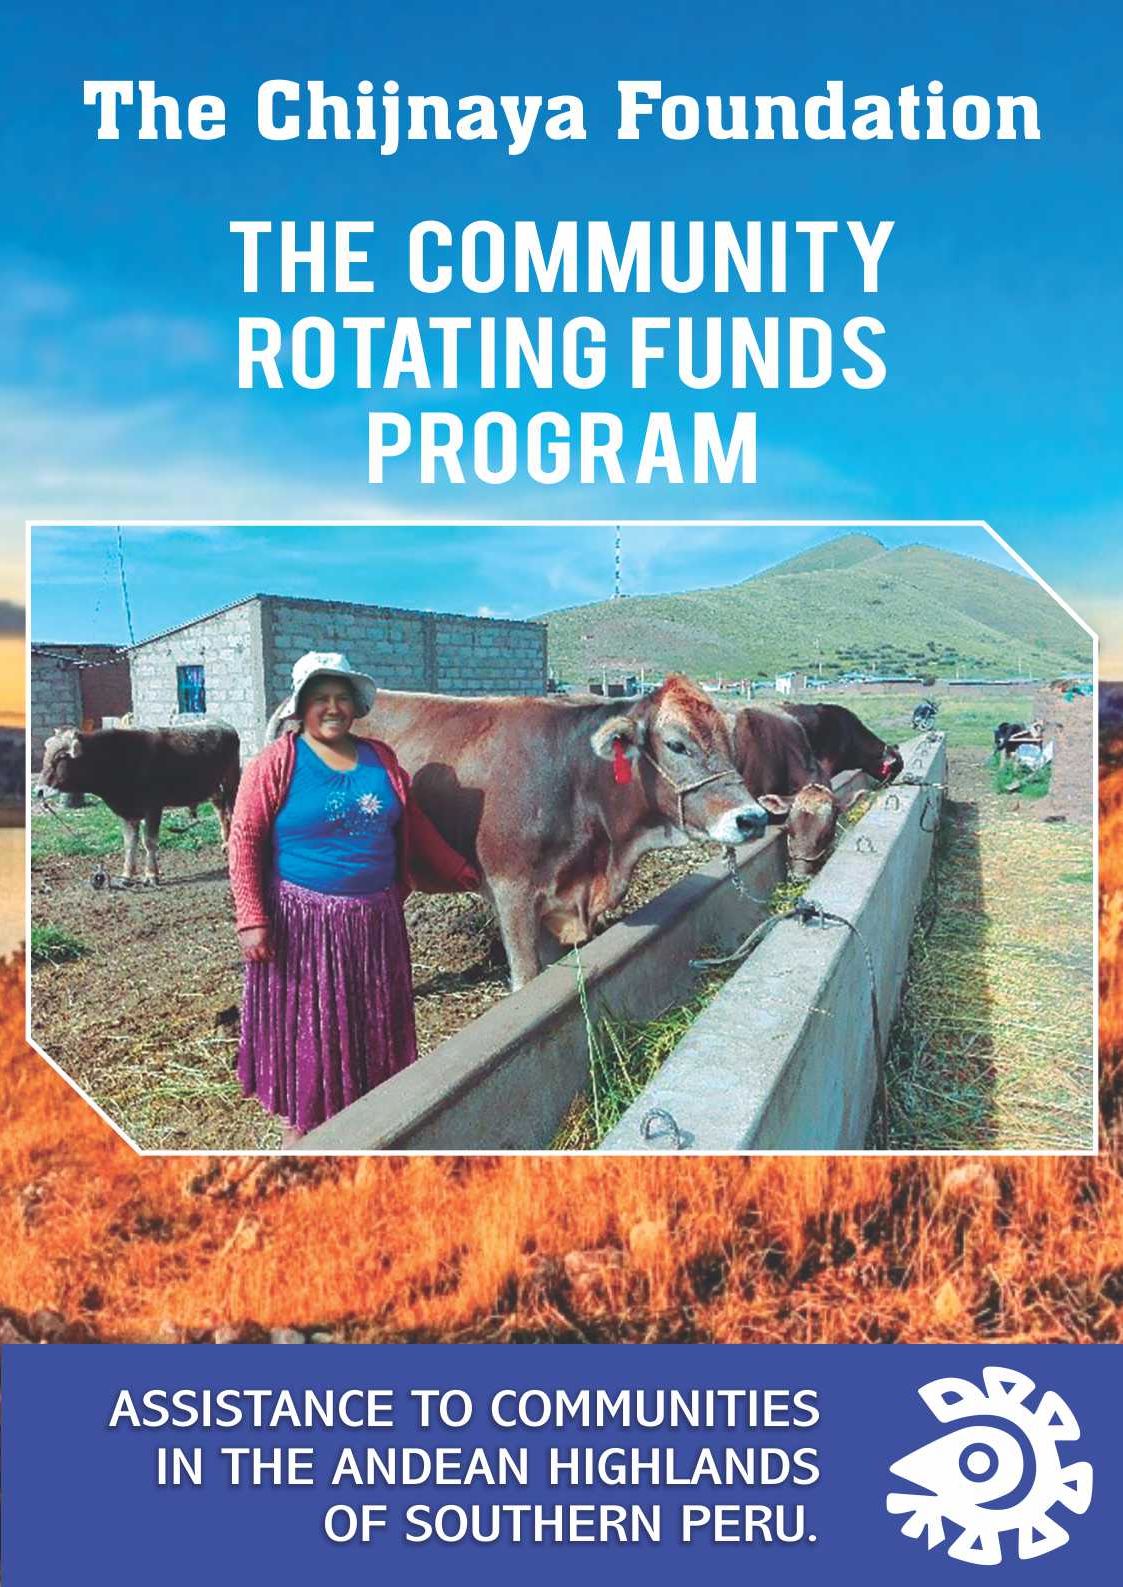 Link to Rotating Funds Flyer